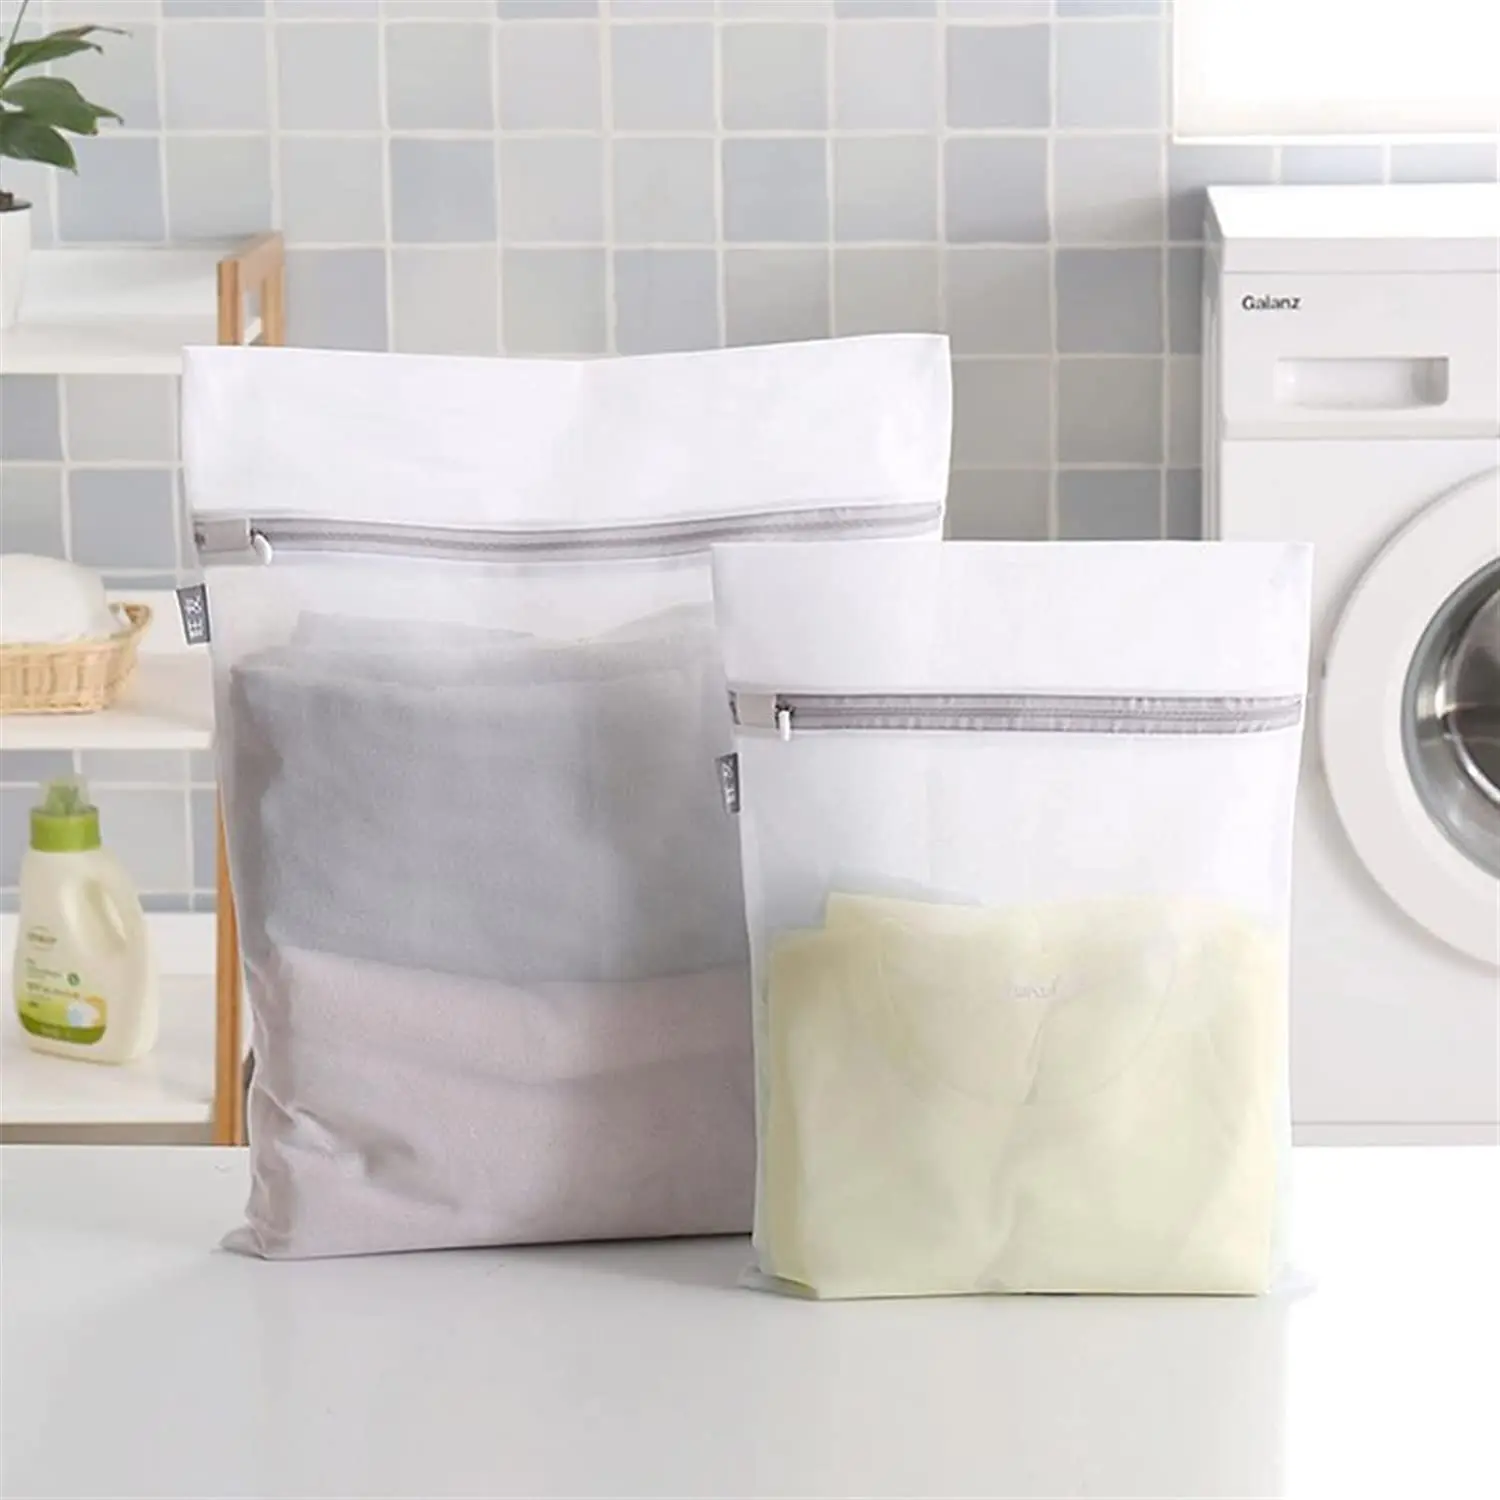 Durable Honeycomb Mesh Laundry Bags Lingerie Bags For Laundry Honeycomb ...